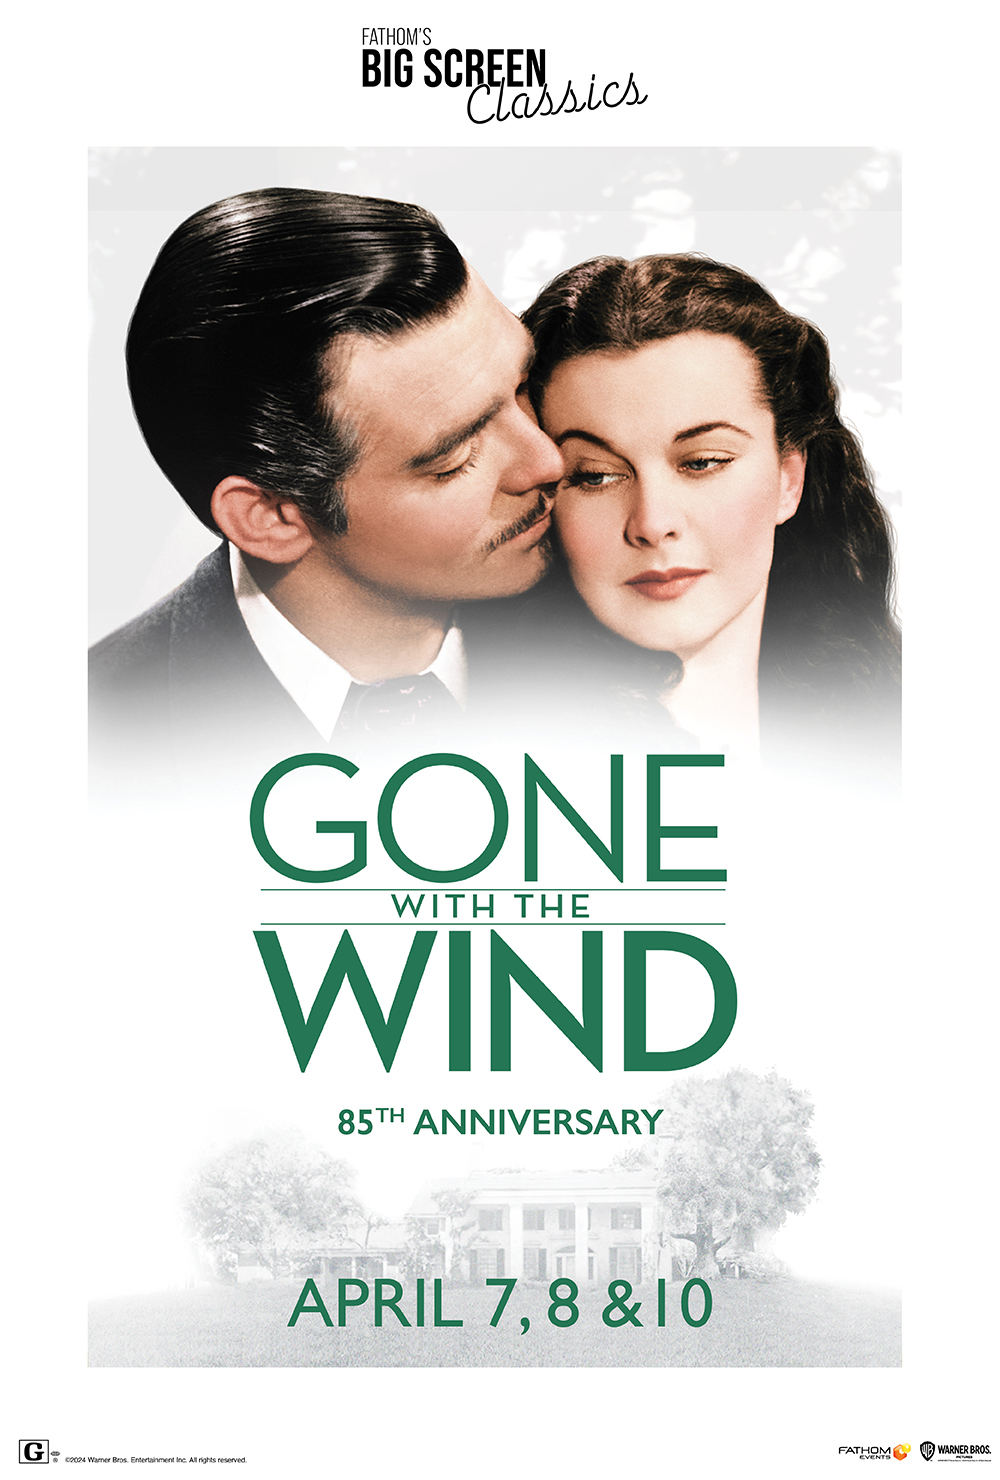 Gone with the Wind 85th Anniversary at an AMC Theatre near you.